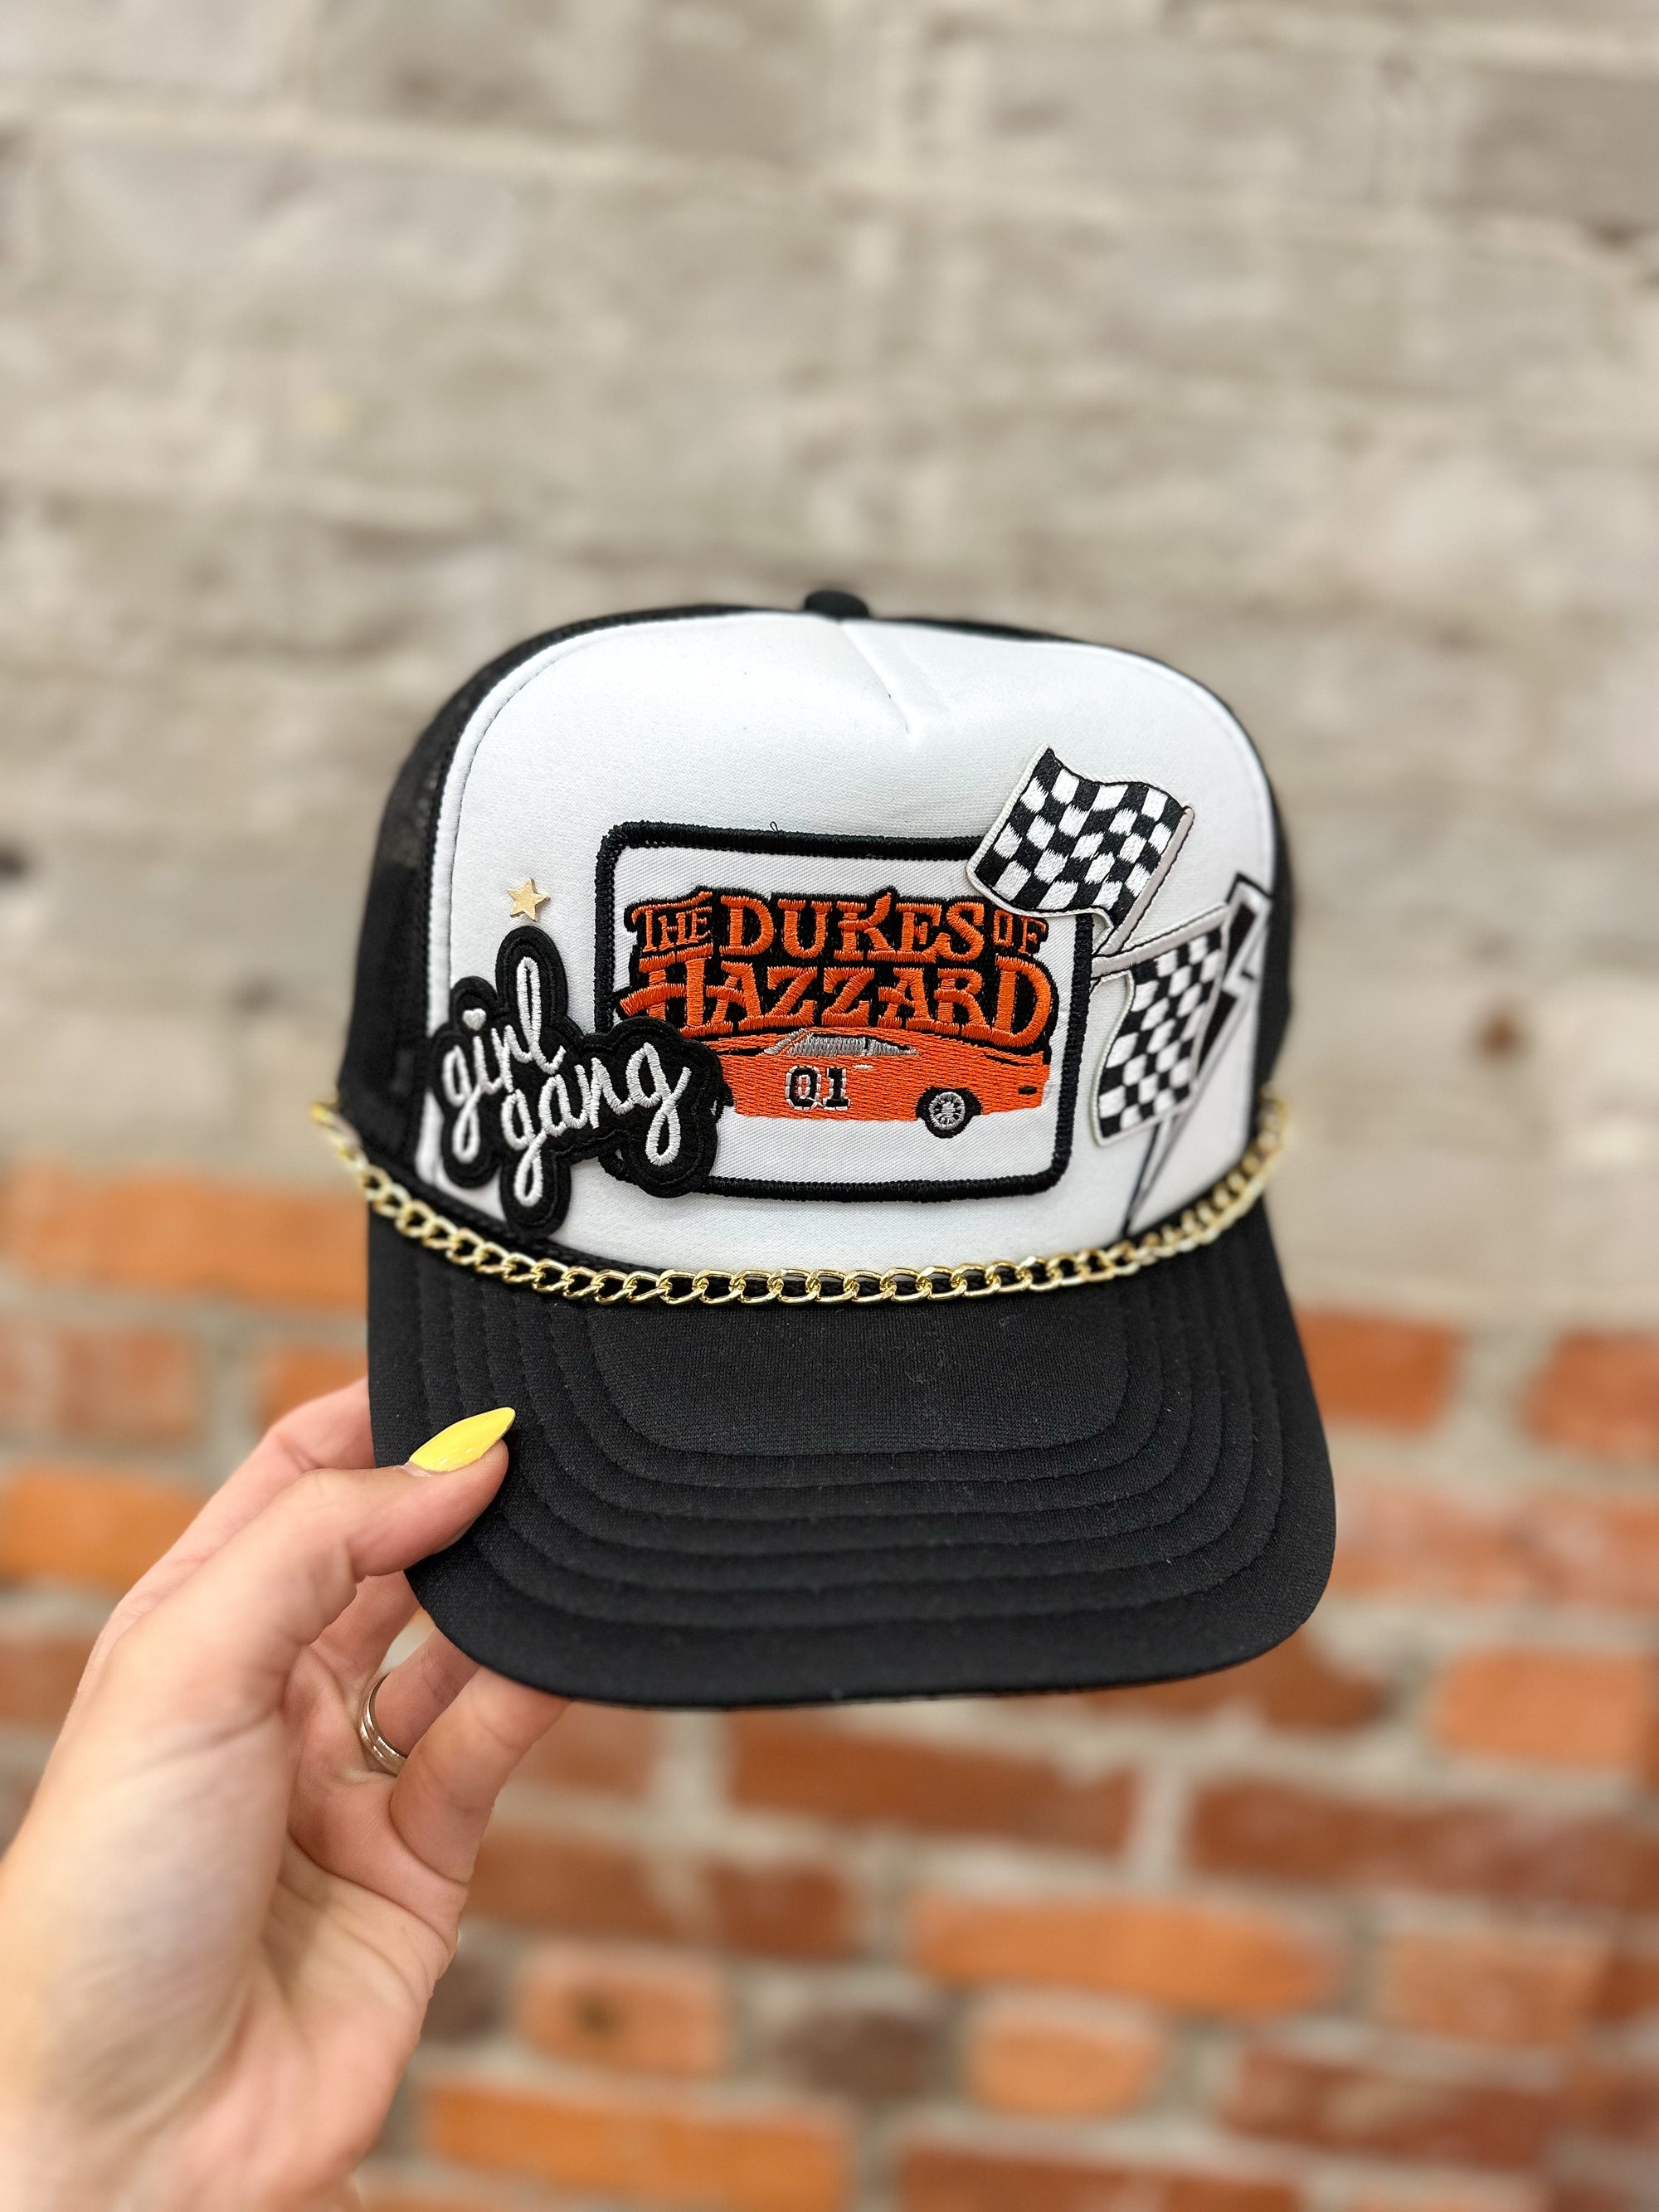 Pre-Made Dukes of Hazard Patched Hat